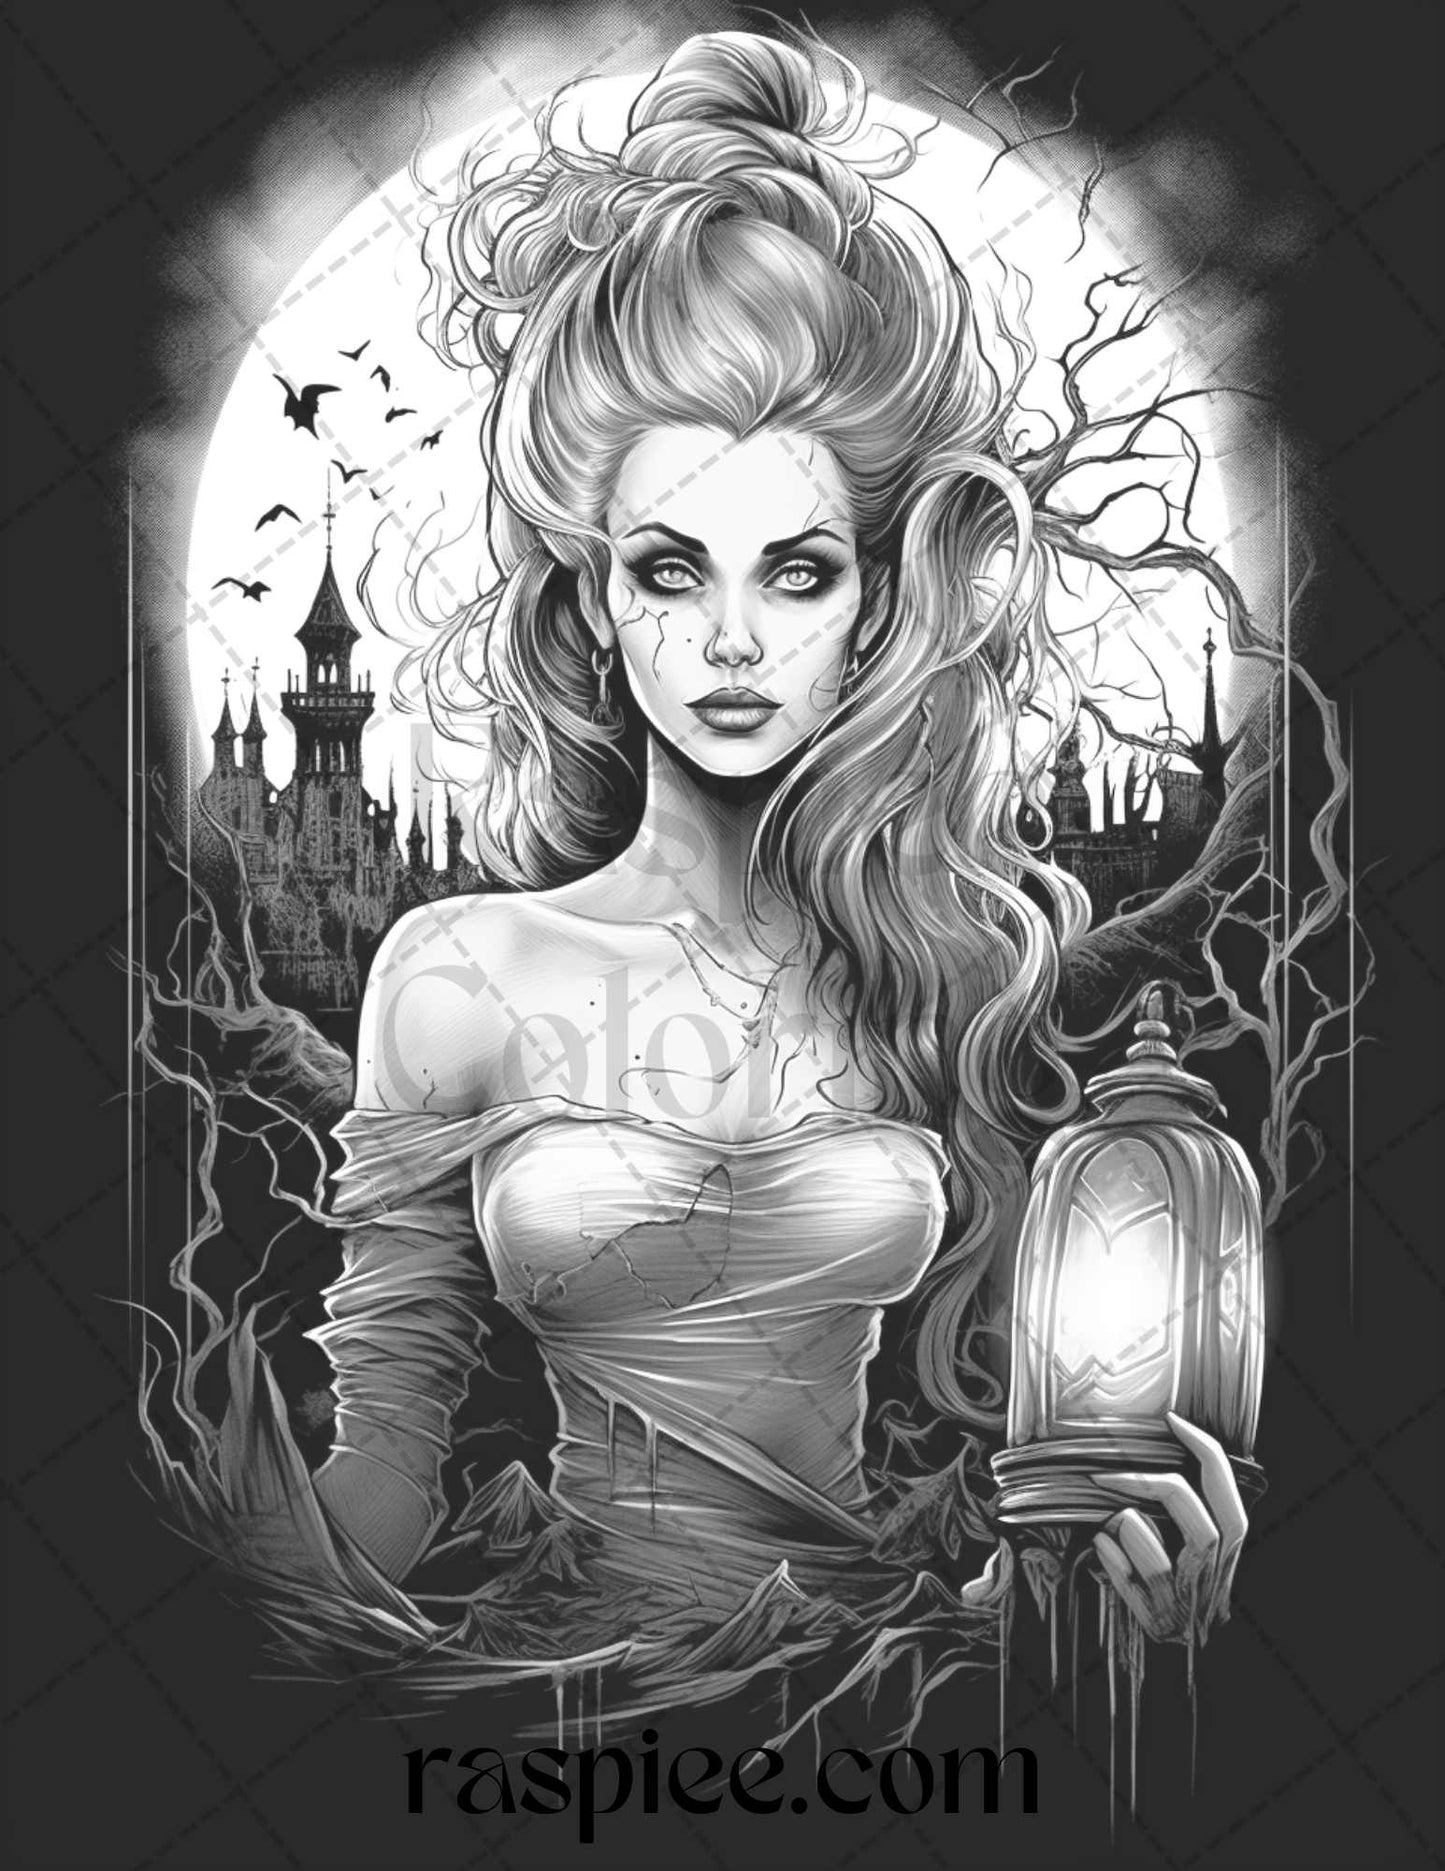 Halloween Vampire Coloring Pages for Adults, Spooky Grayscale Coloring Book, Printable Gothic Vampire Art, Dark Fantasy Coloring Sheets, Halloween Craft Ideas, Printable Scary Coloring Pages, Vampire Themed Coloring Book, Halloween Art for Grown-Ups, Hauntingly Beautiful Coloring Sheets, Halloween Grayscale Coloring Pages